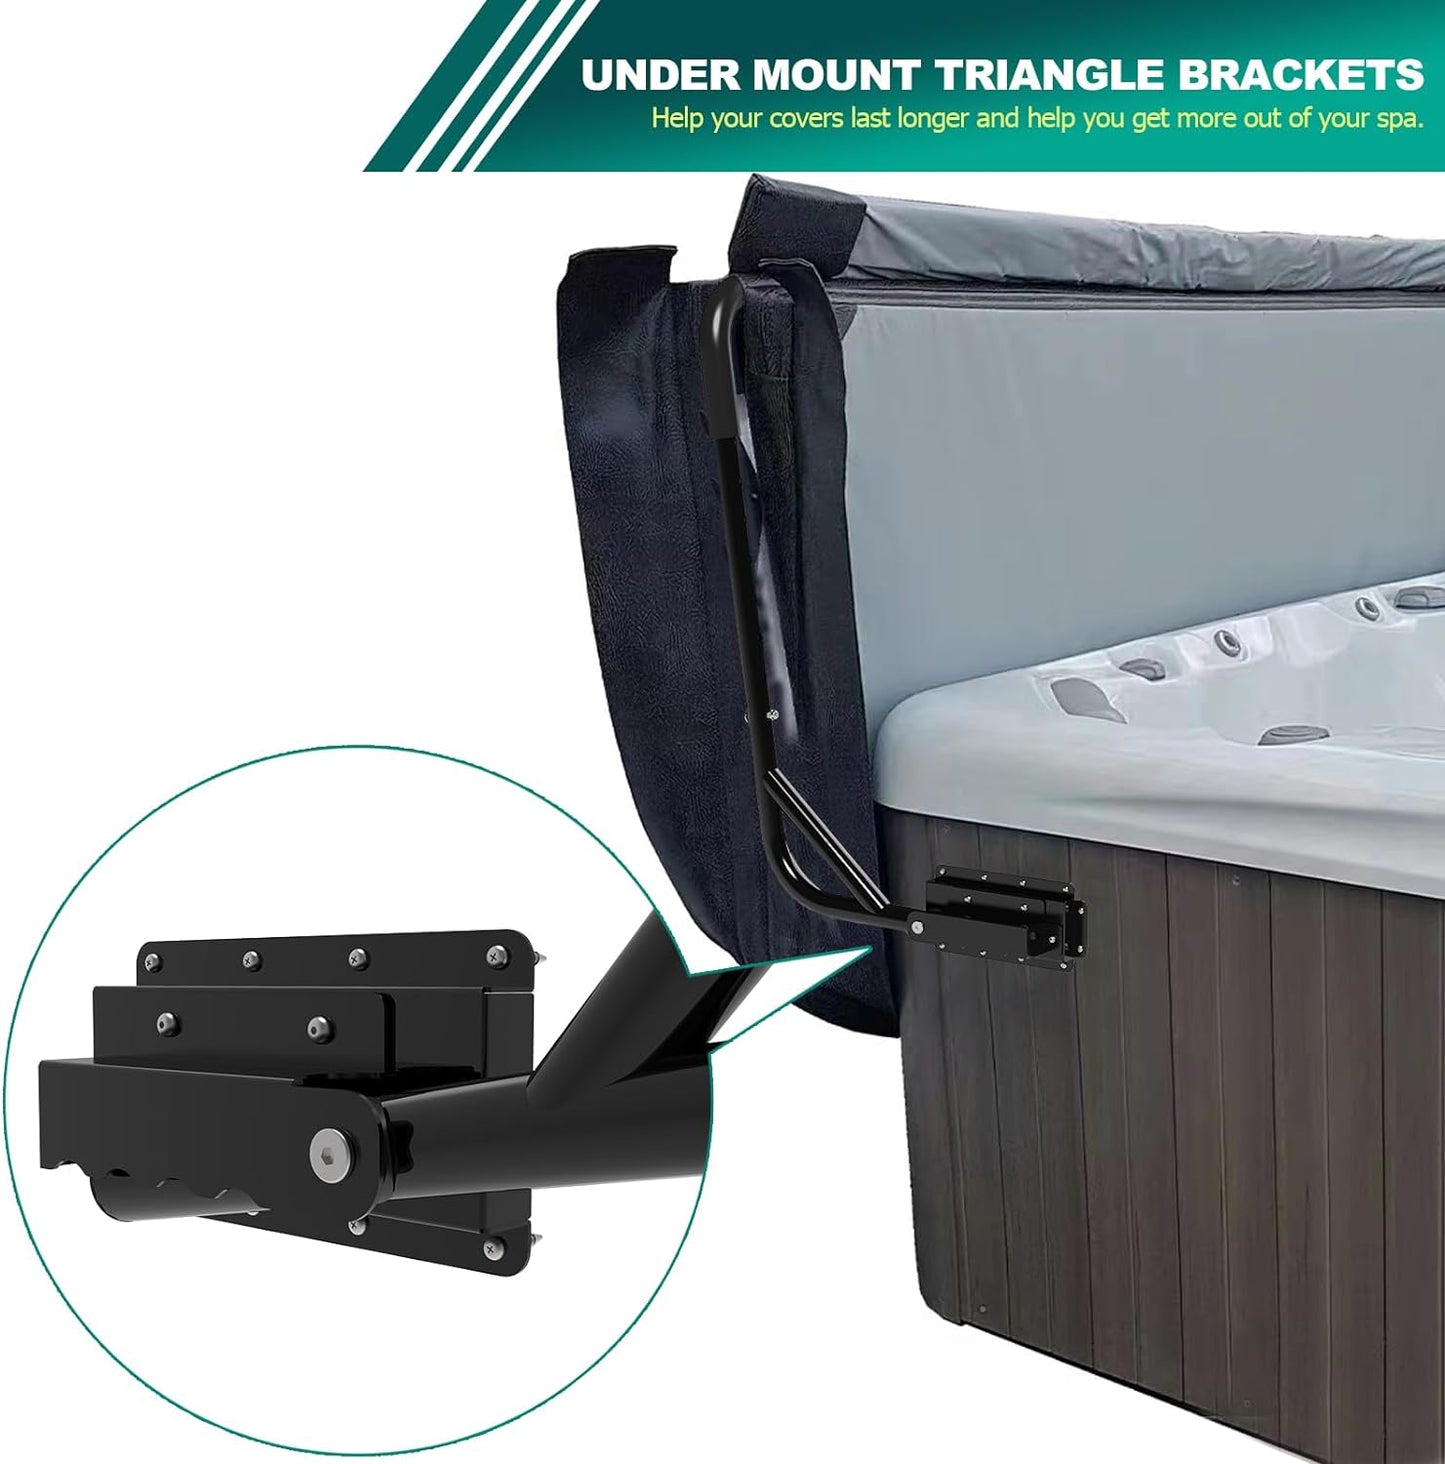 Tocretoare Spa Cover Lifts, Hot Tub Cover Lift & Pivot Top Mount Spa Removal System Reinforced Bracket, Hydraulic Hot Tub